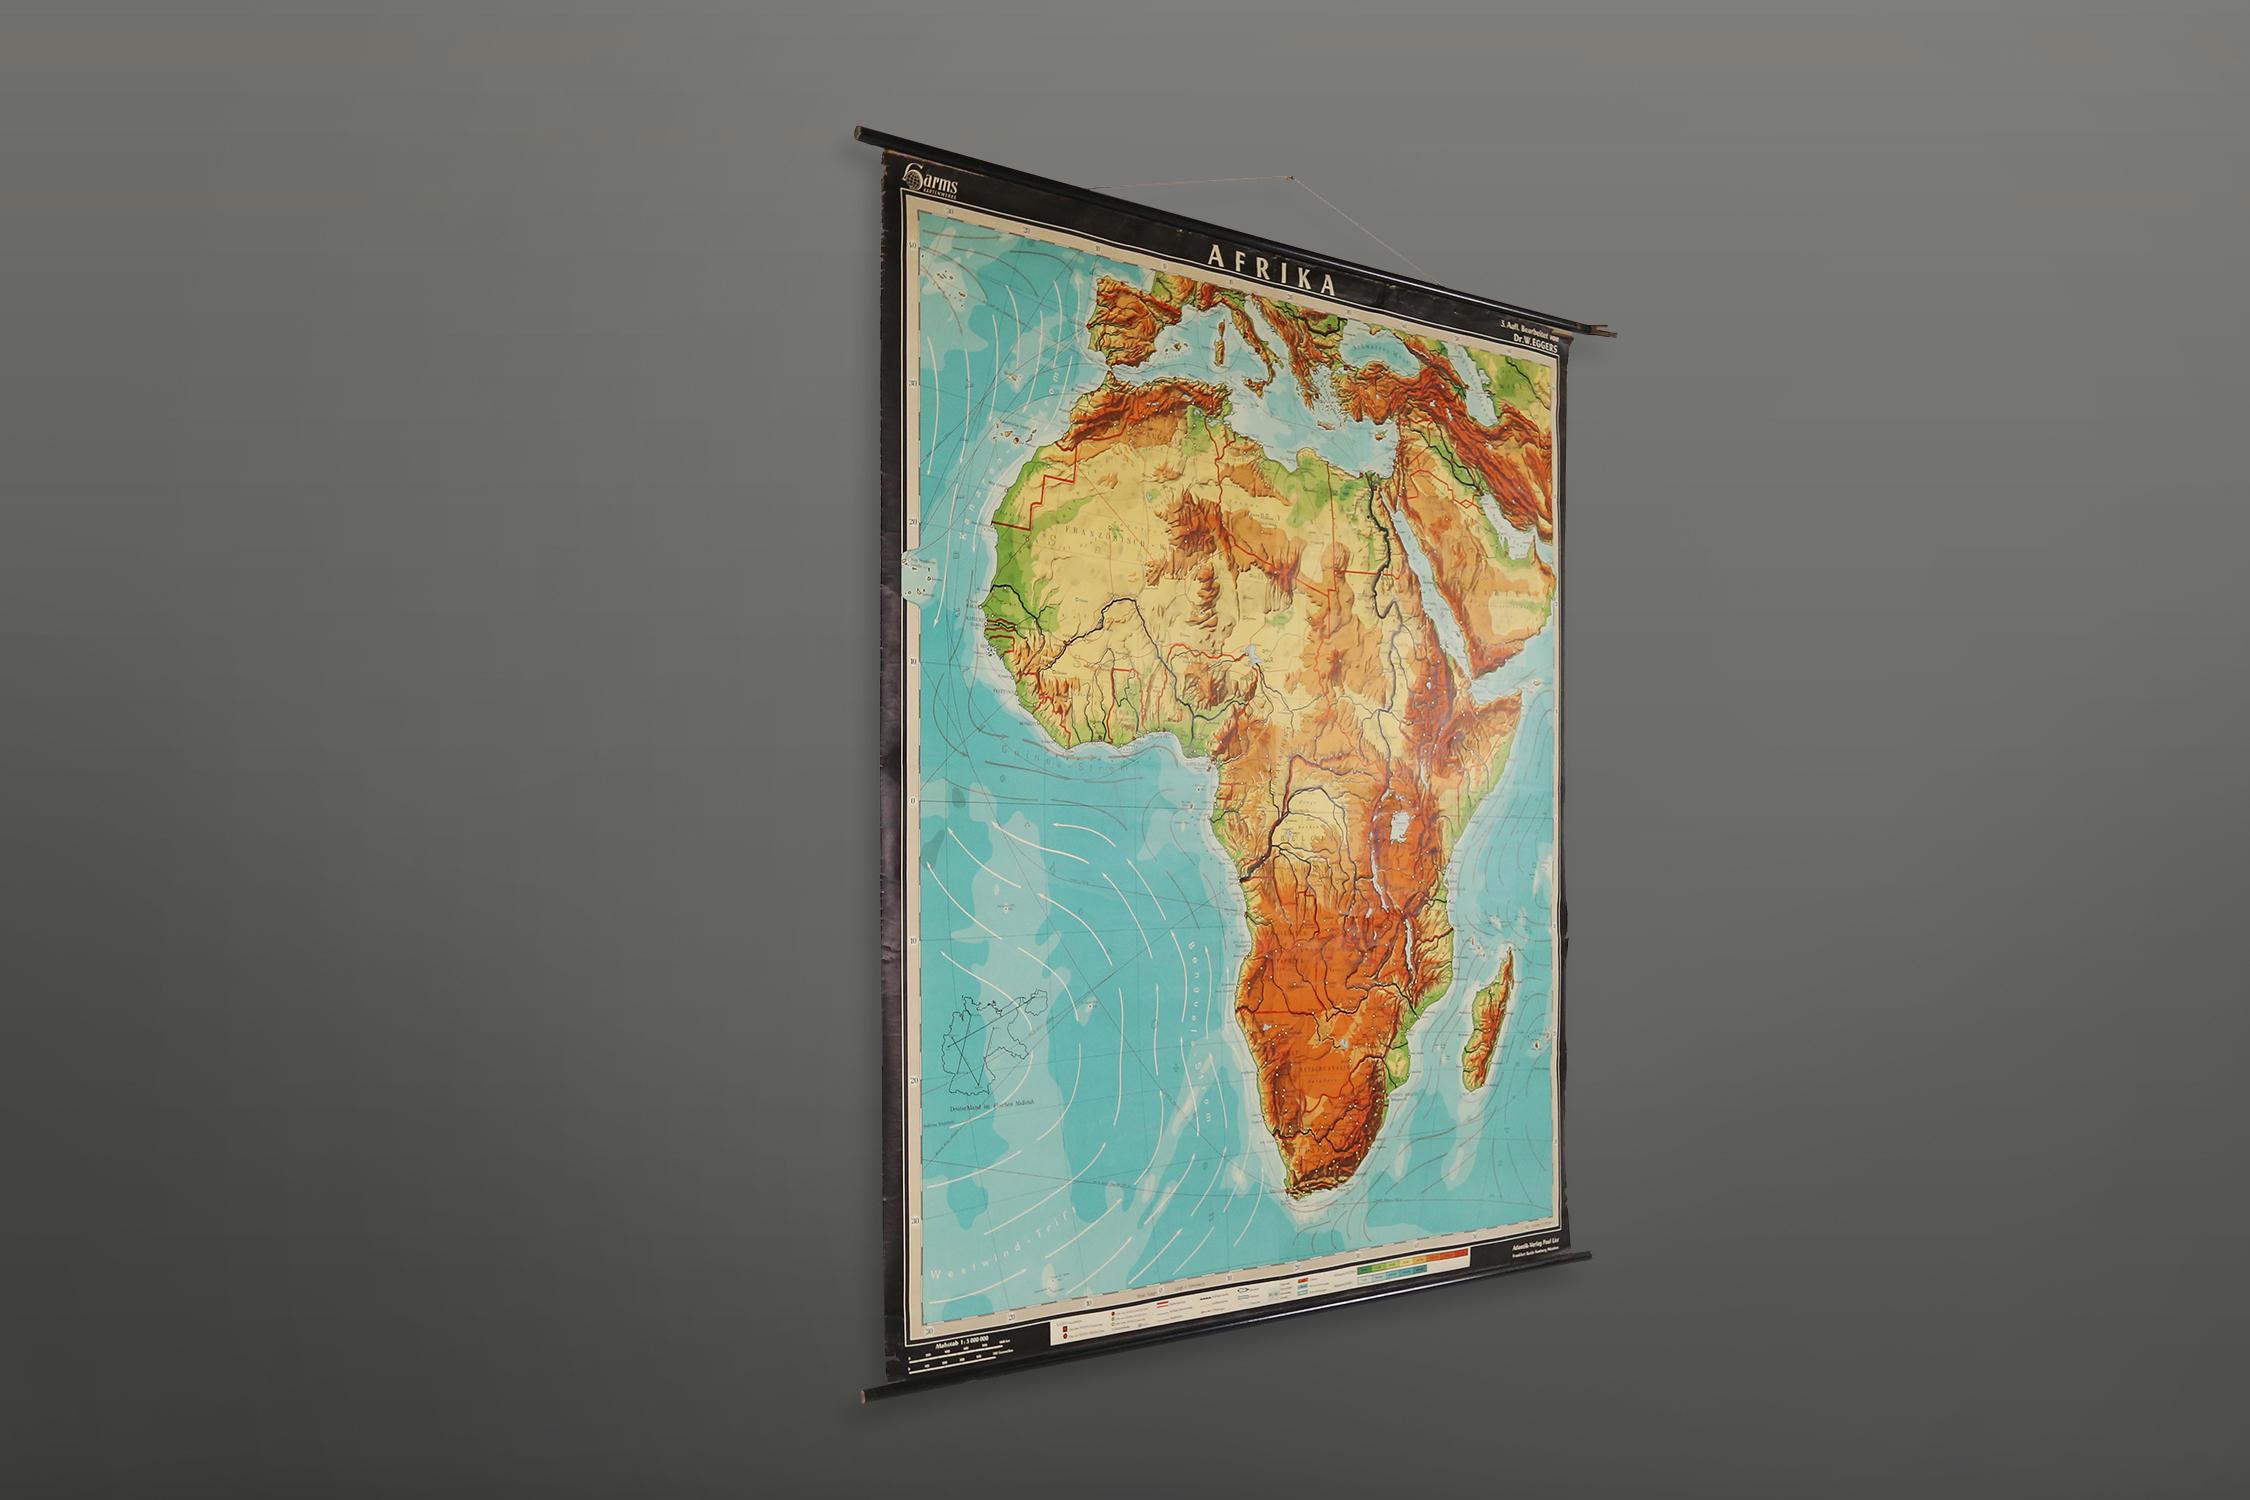 Geographical vintage school wall card Africa. The school poster is in a good vintage condition with types of old -age signs that you can see from the product images.